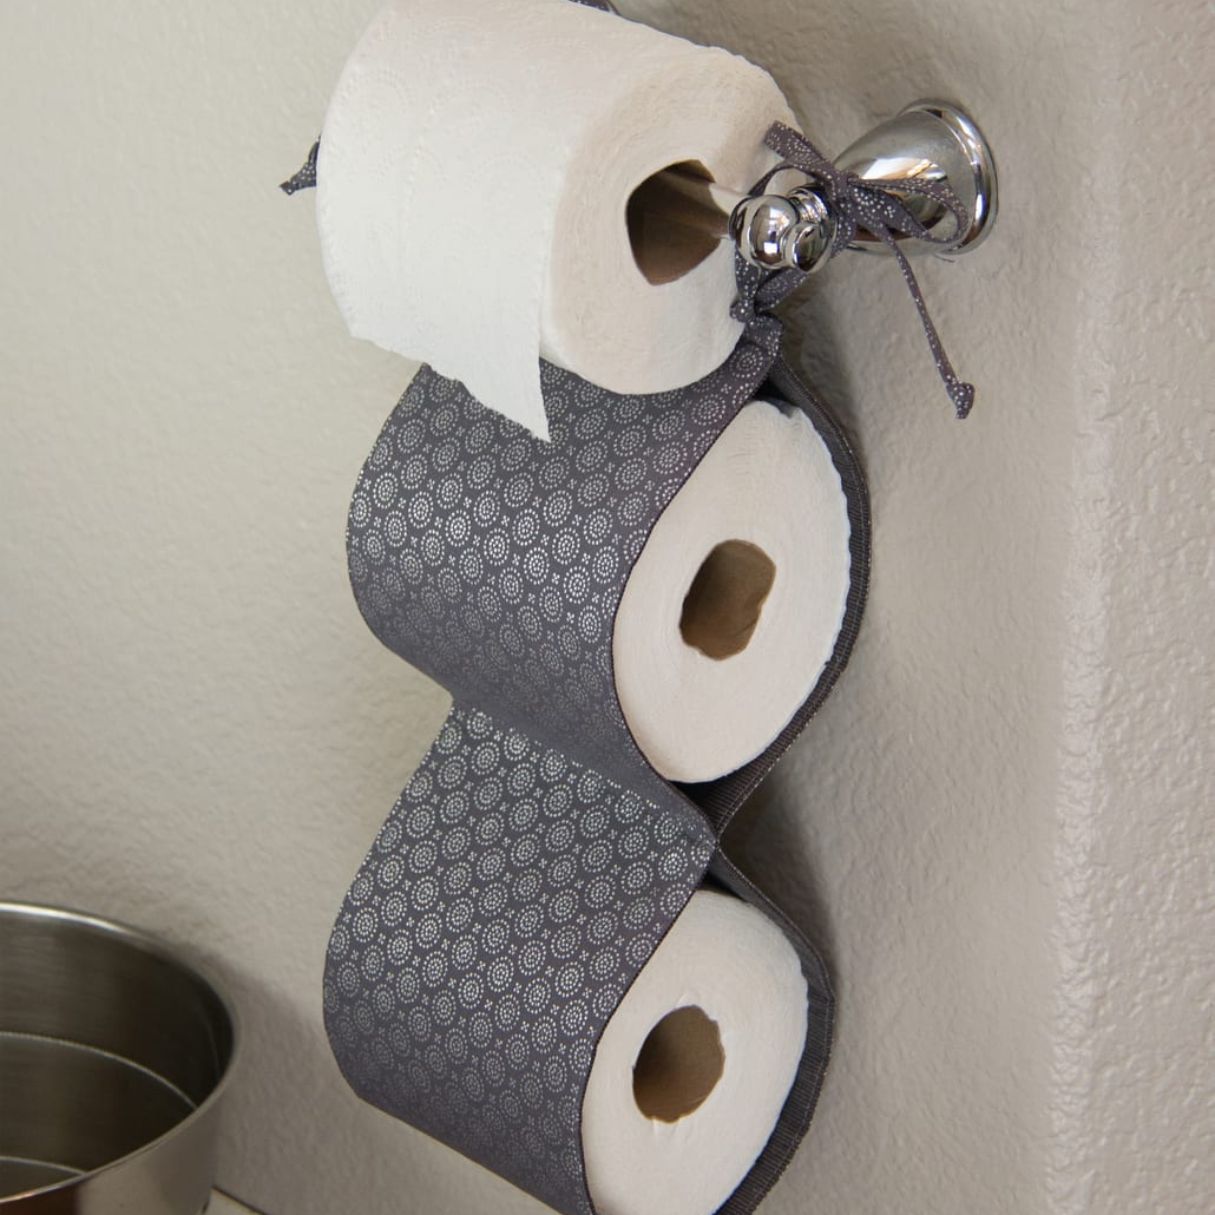 Where To Buy A Toilet Paper Holder